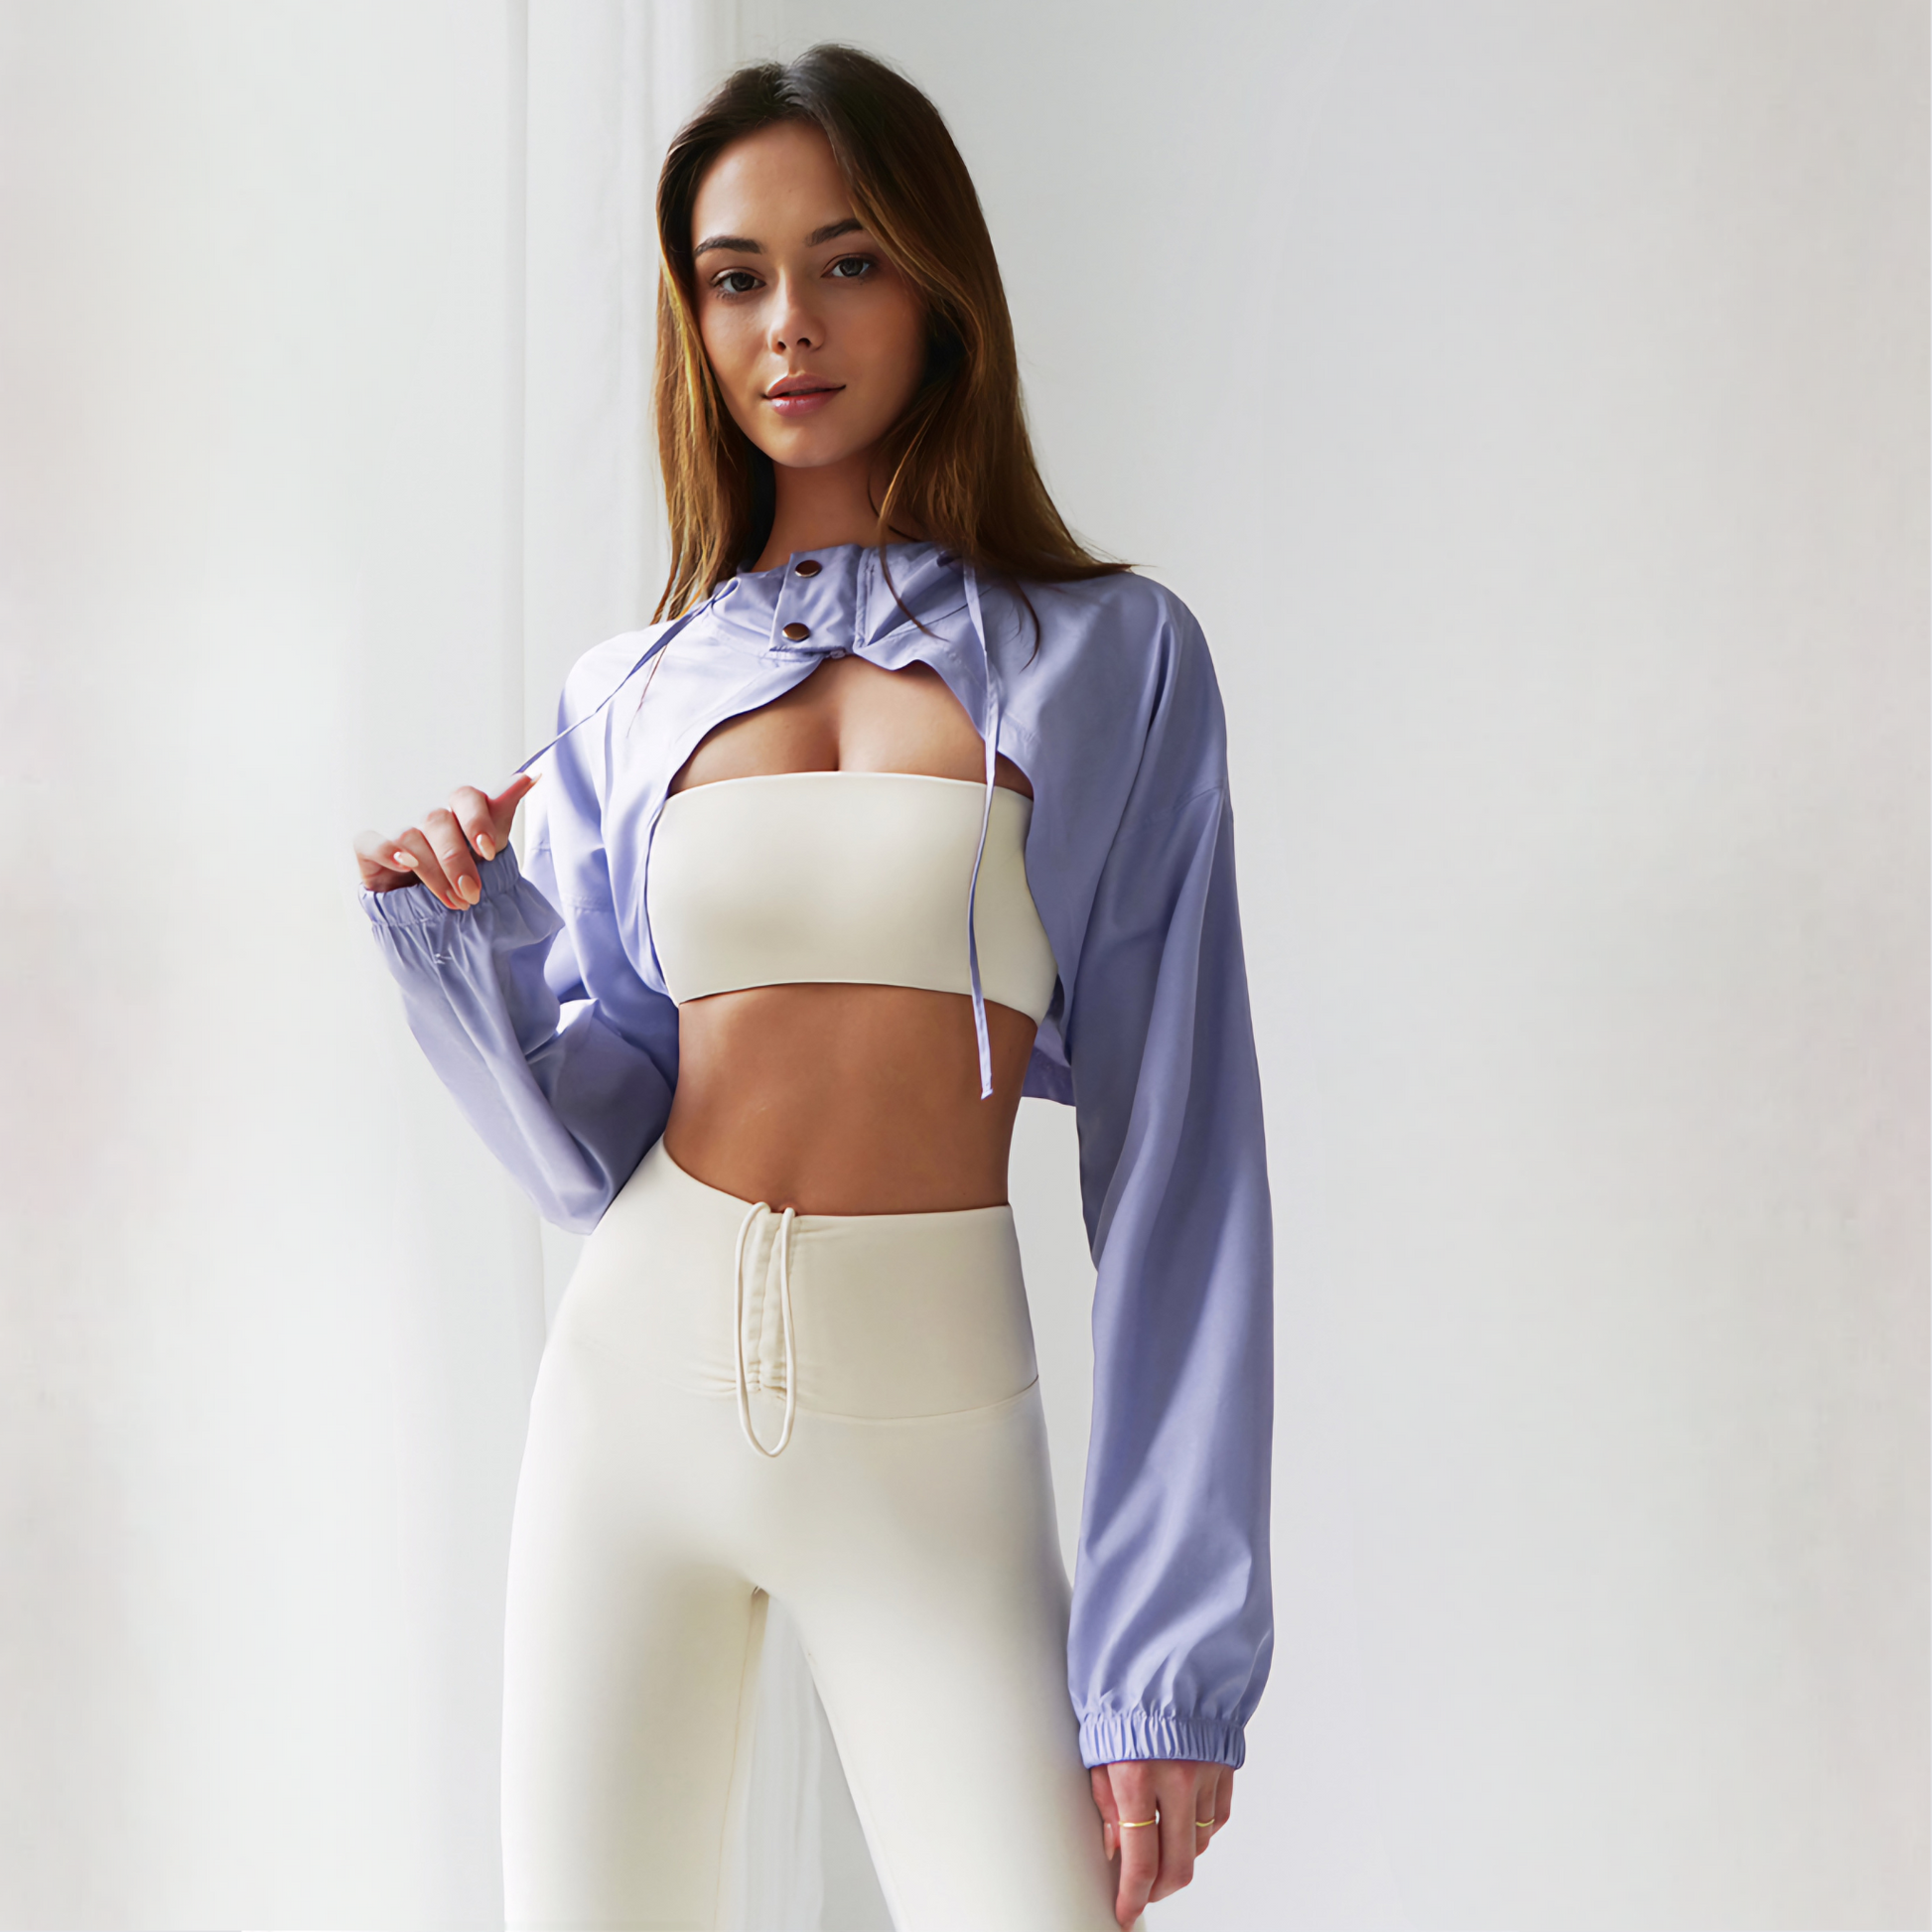 Fitness model wearing  the ELLA Jacket in lavender from vibras activewear.